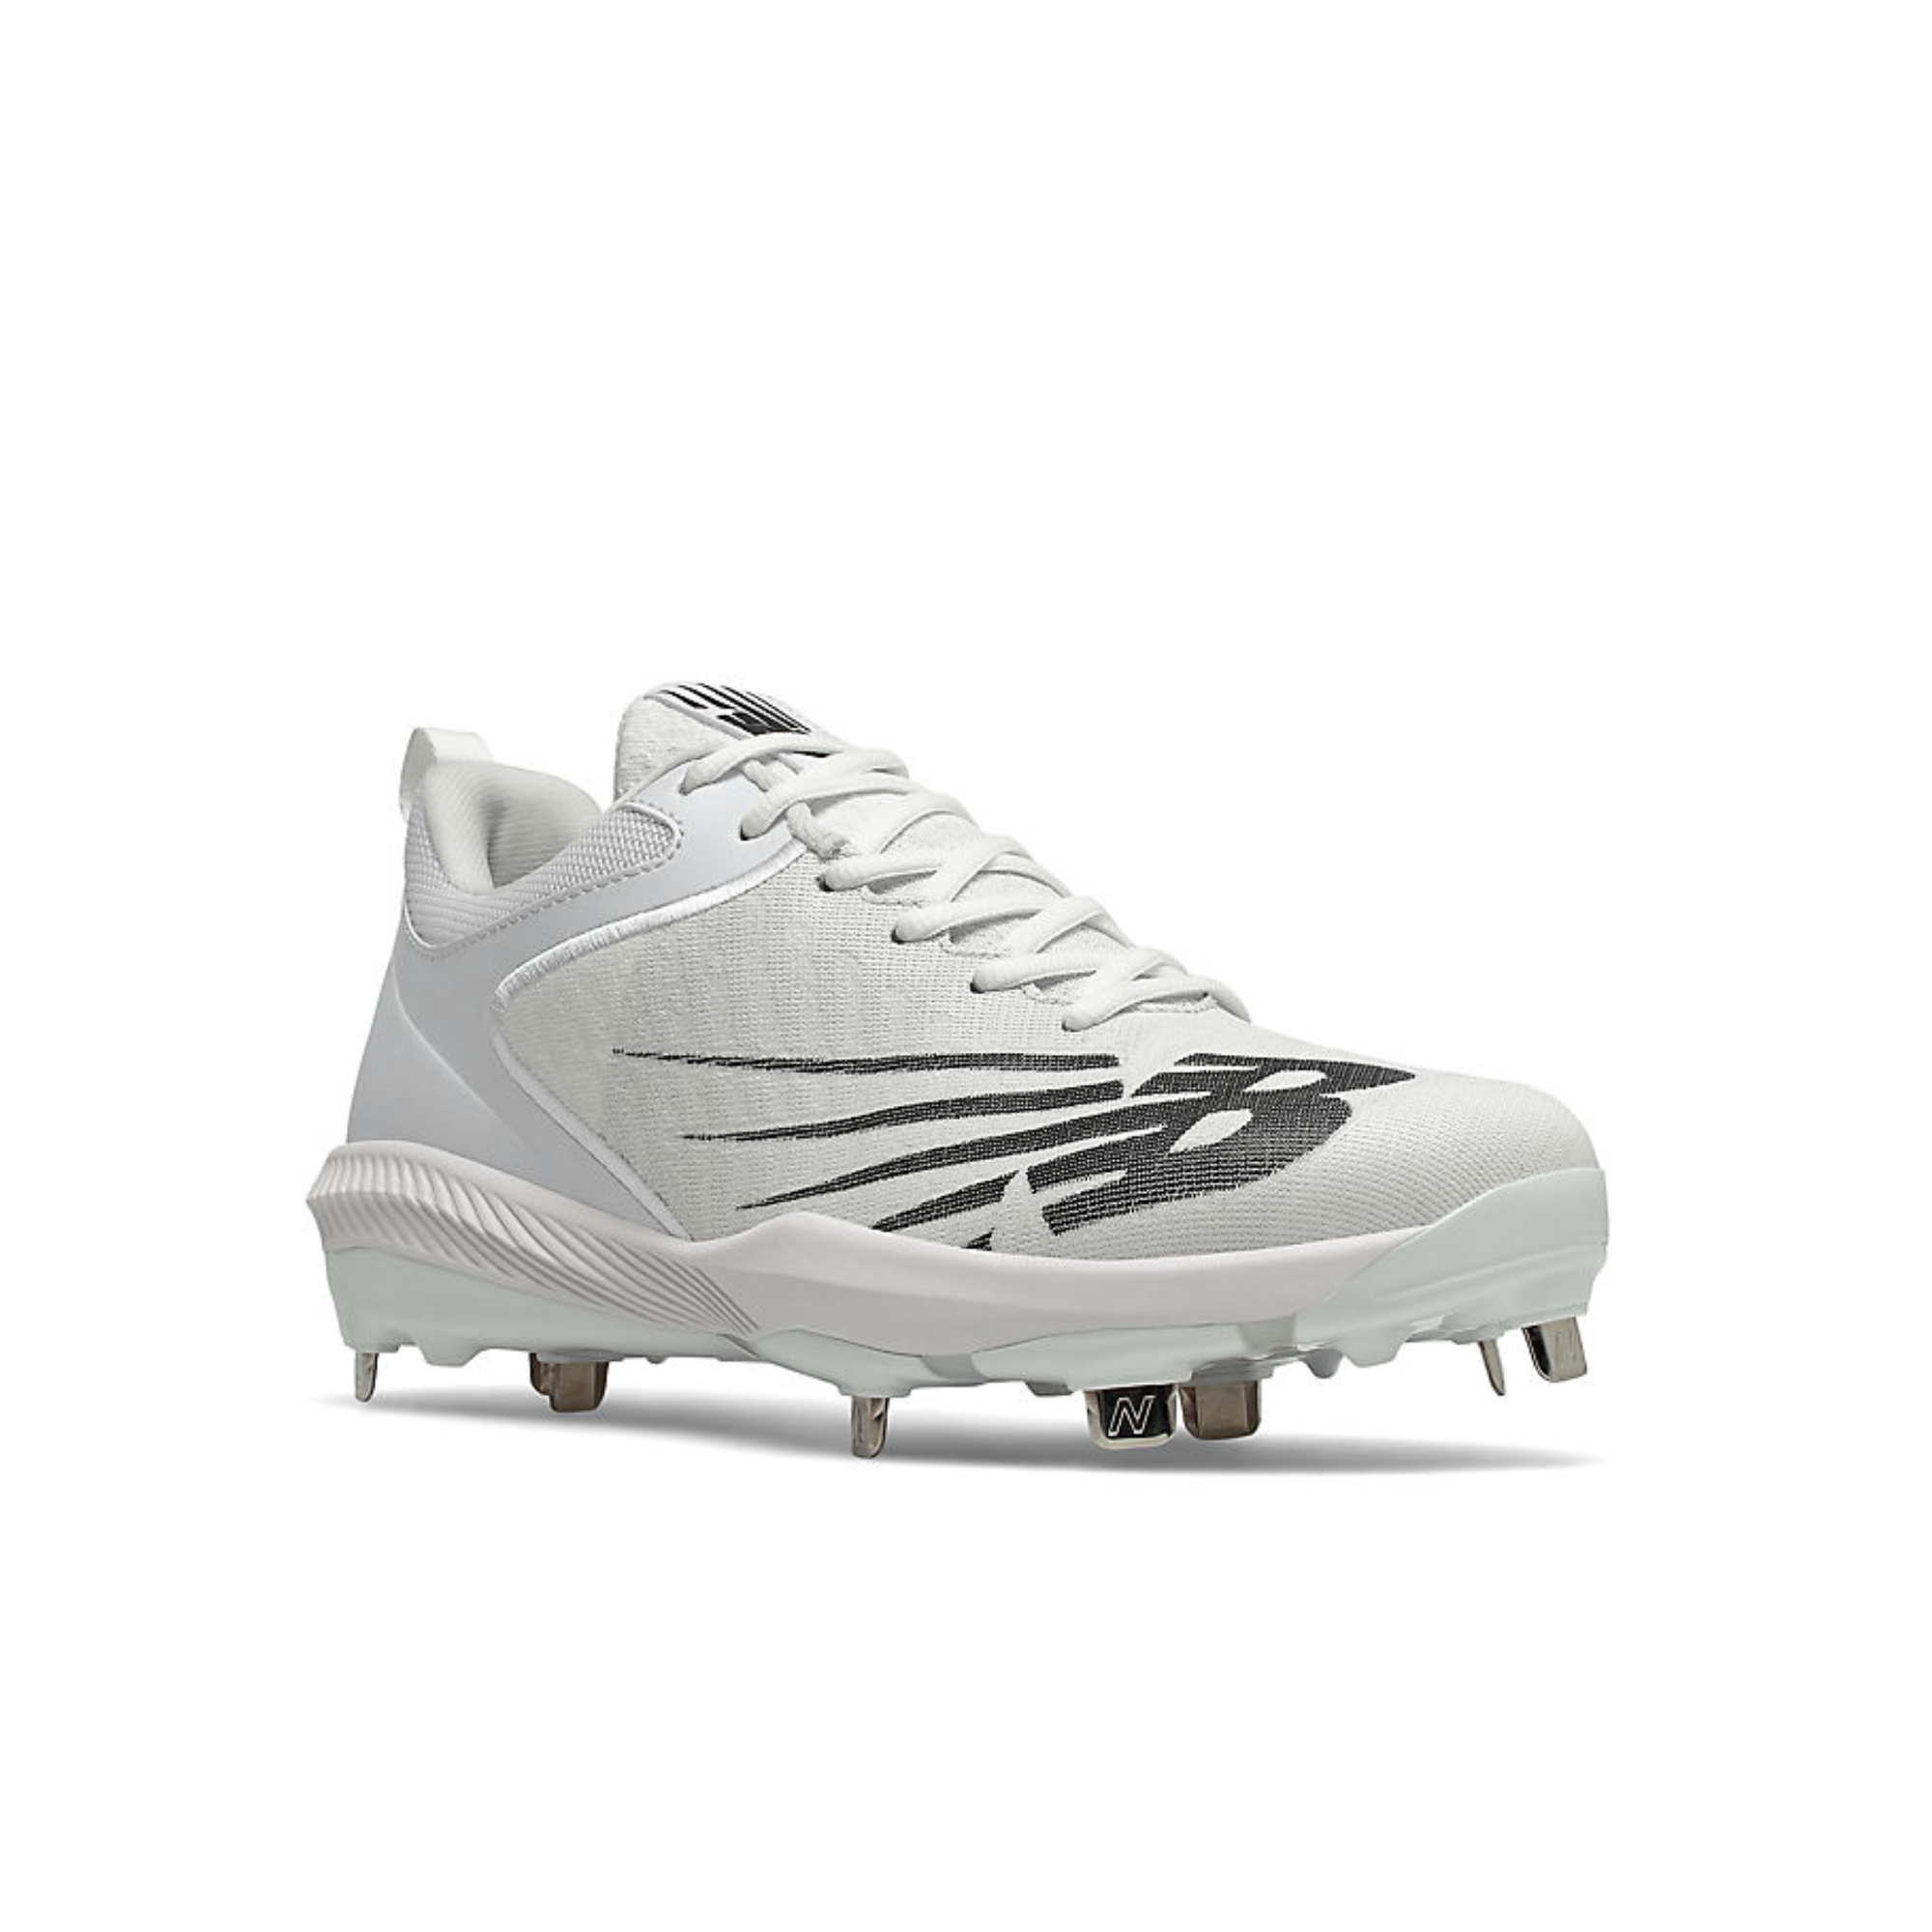 New Balance FuelCell 4040 v6 Metal Cleat L4040TW6 White